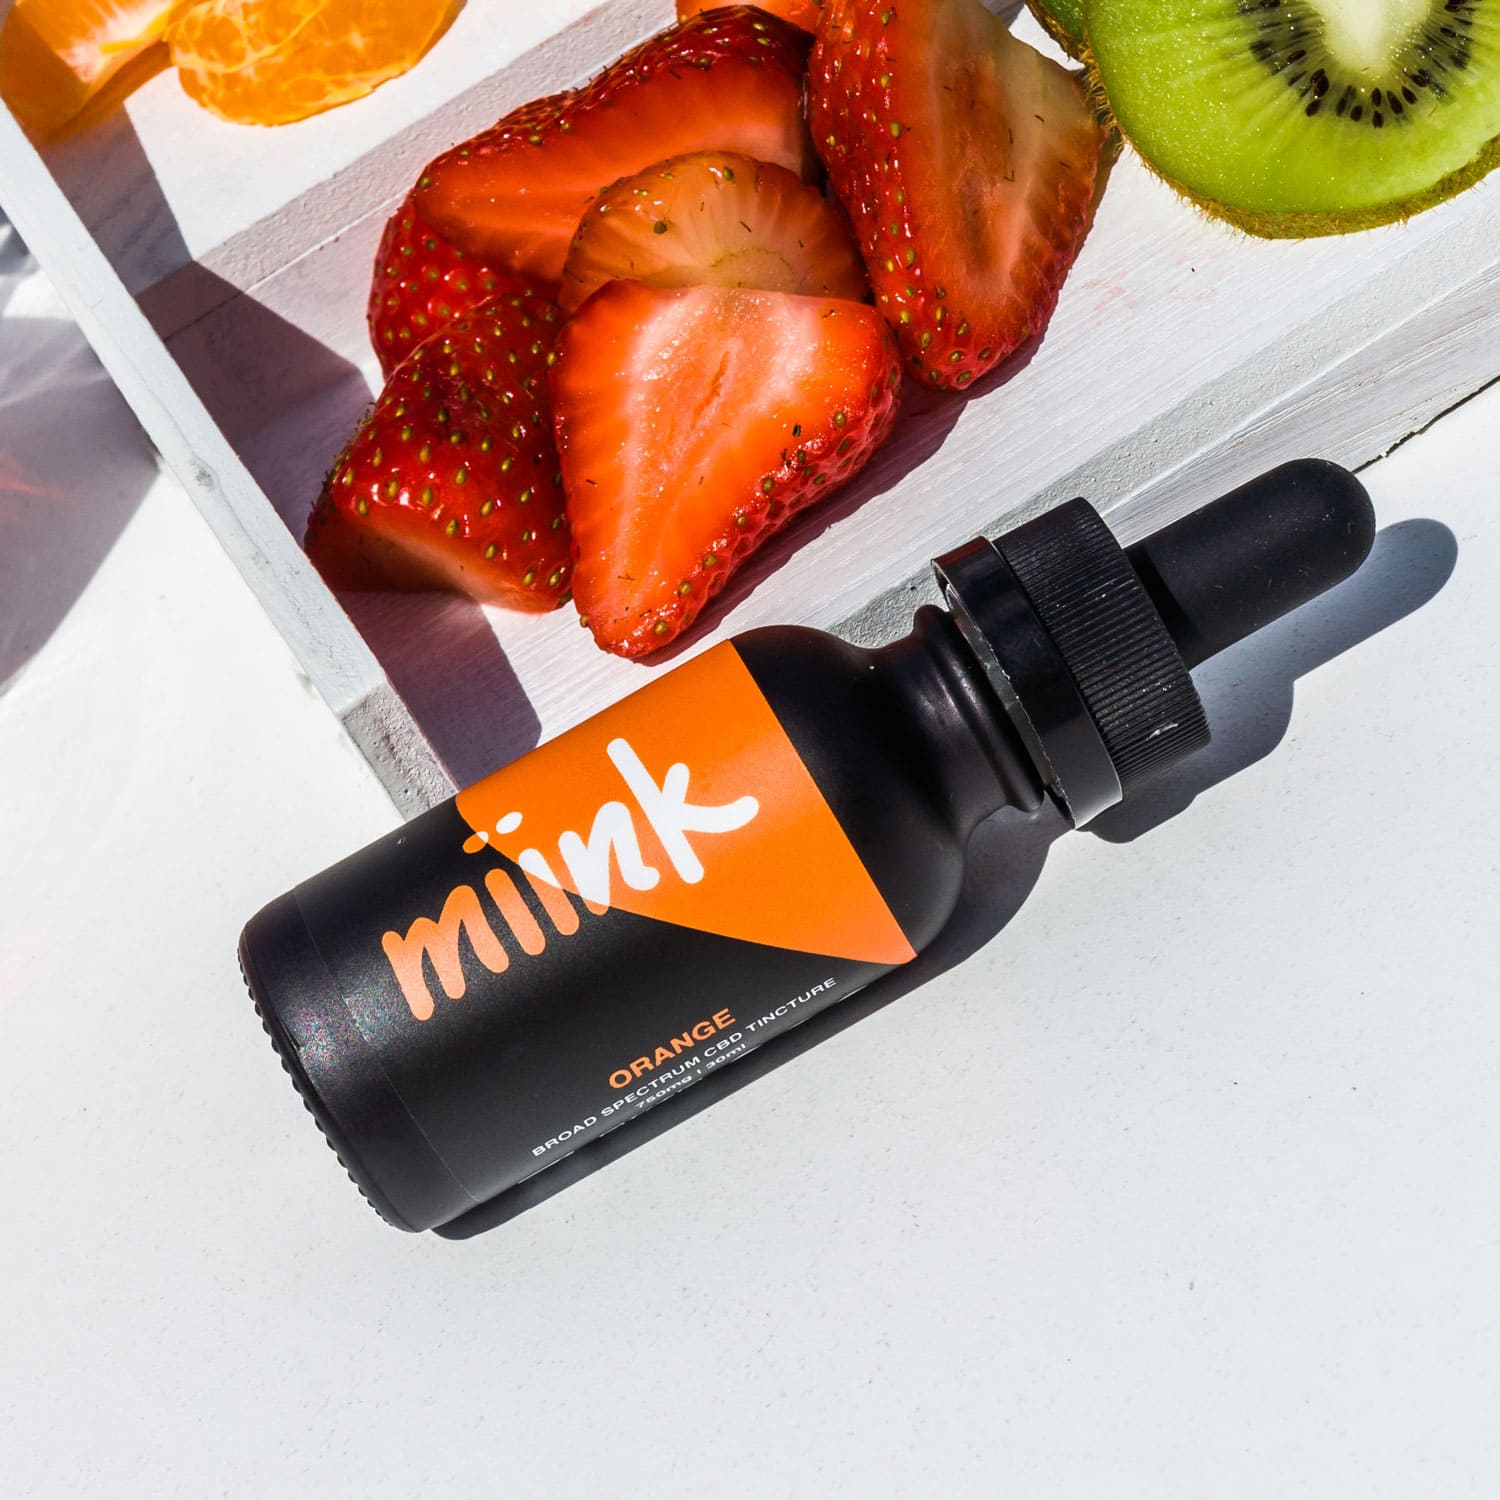 MIINK: Elevating Healing and Well-Being Through Therapeutic Innovation